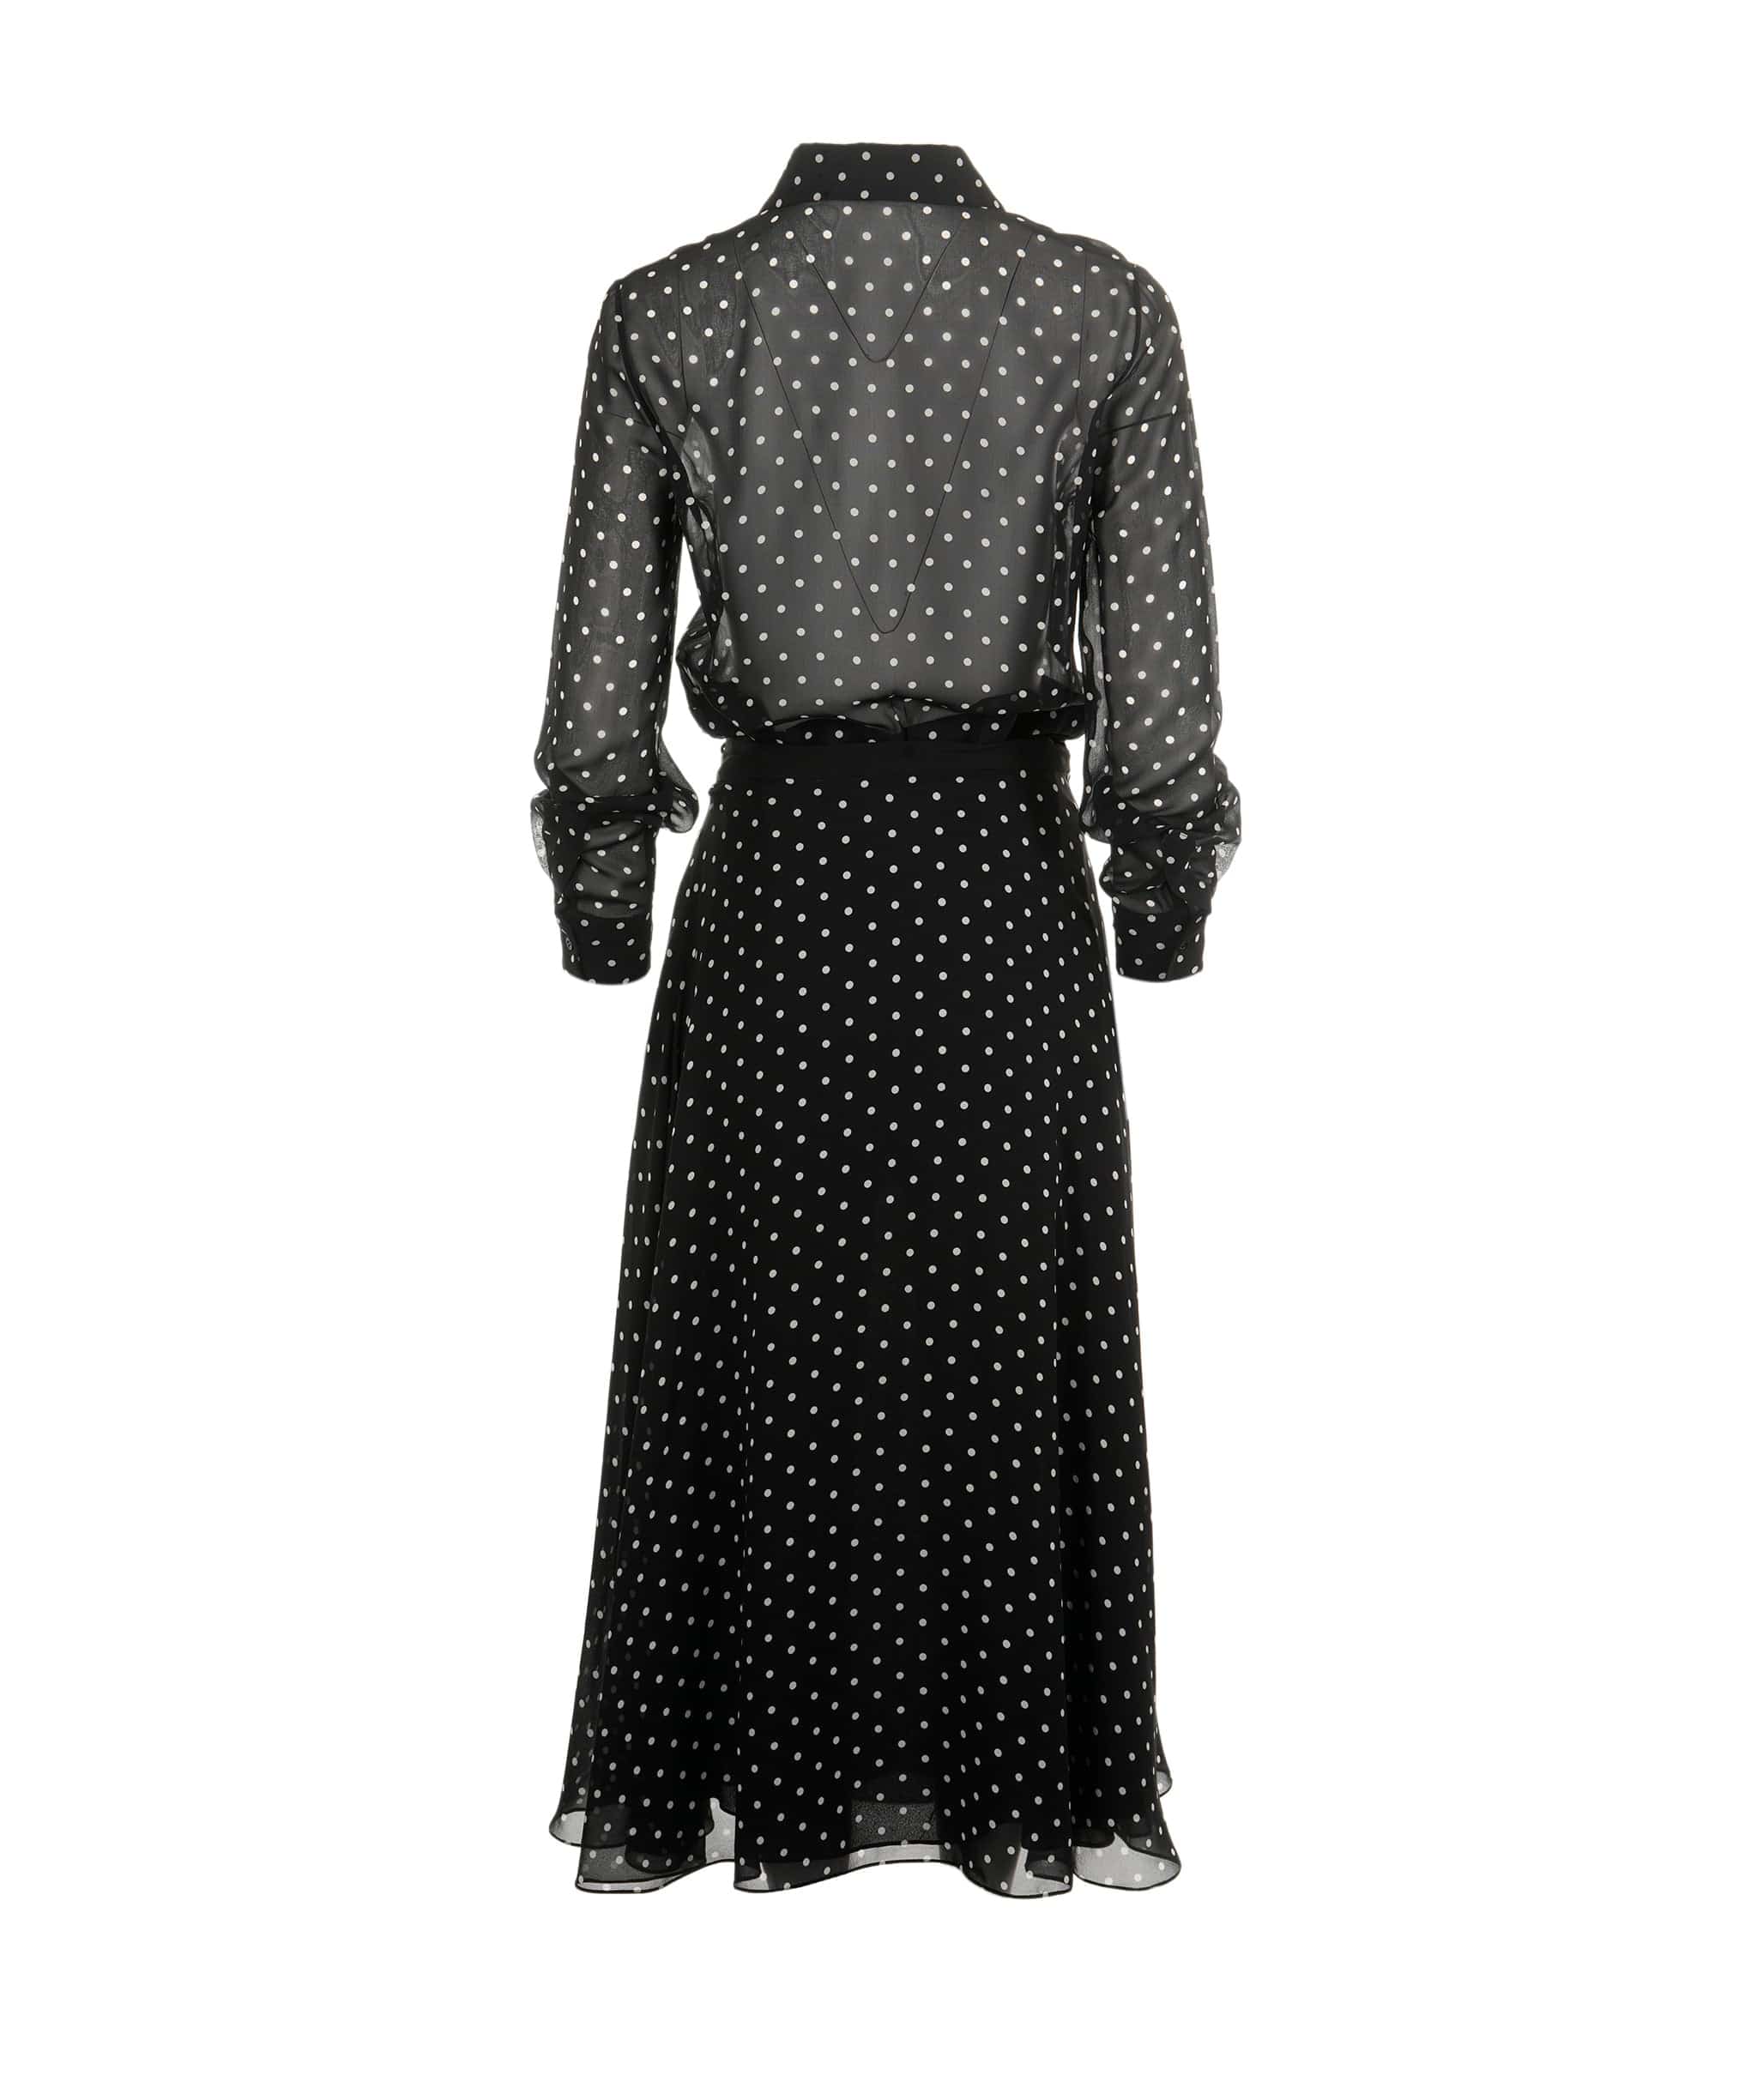 Christian Dior Christian Dior Black and White Polka Dot Playsuit with Matching Skirt and Underlay Size FR 38 ASL7947